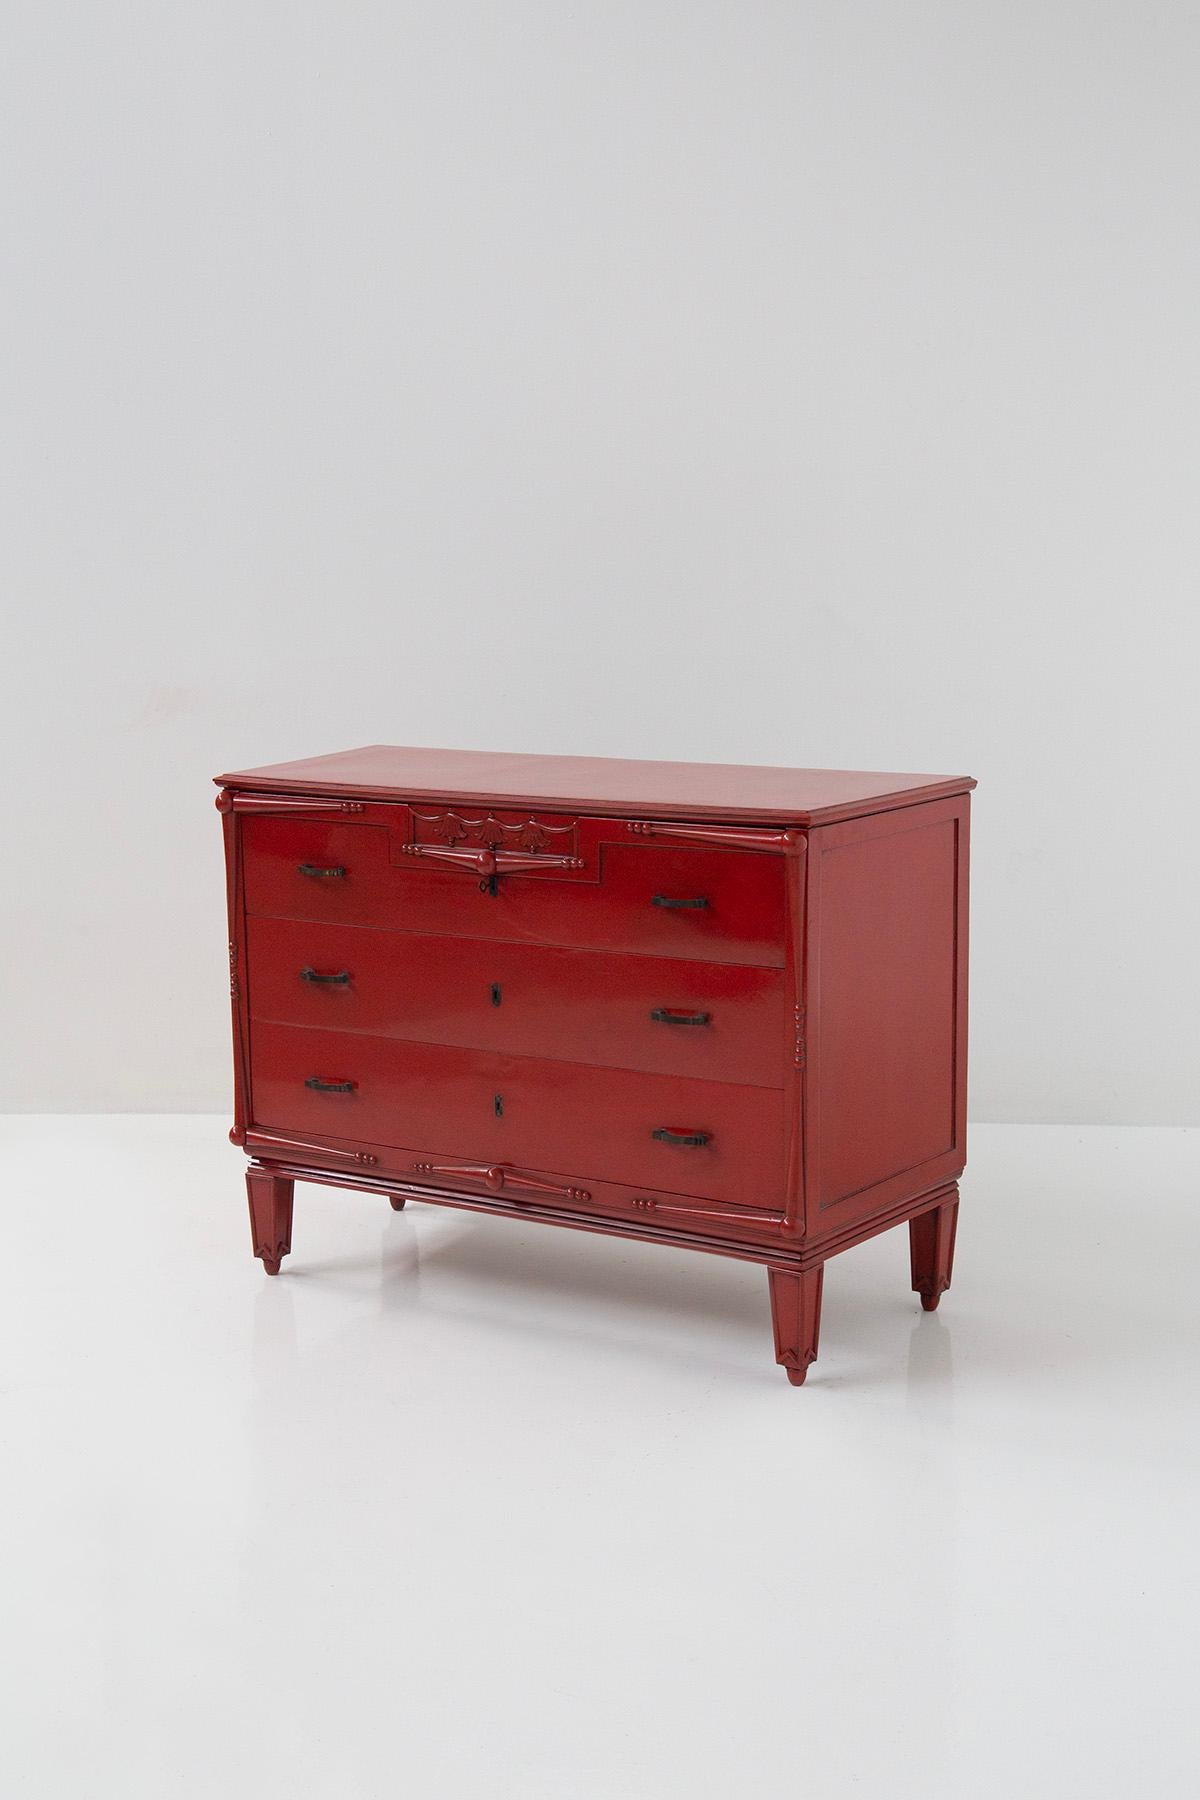 The chest of drawers attributed to the well-known Italian architect Piero Portalupi is an exquisite piece of furniture from the early 20th century. Made with the utmost attention to detail, it displays elegance and refinement in its design.
This